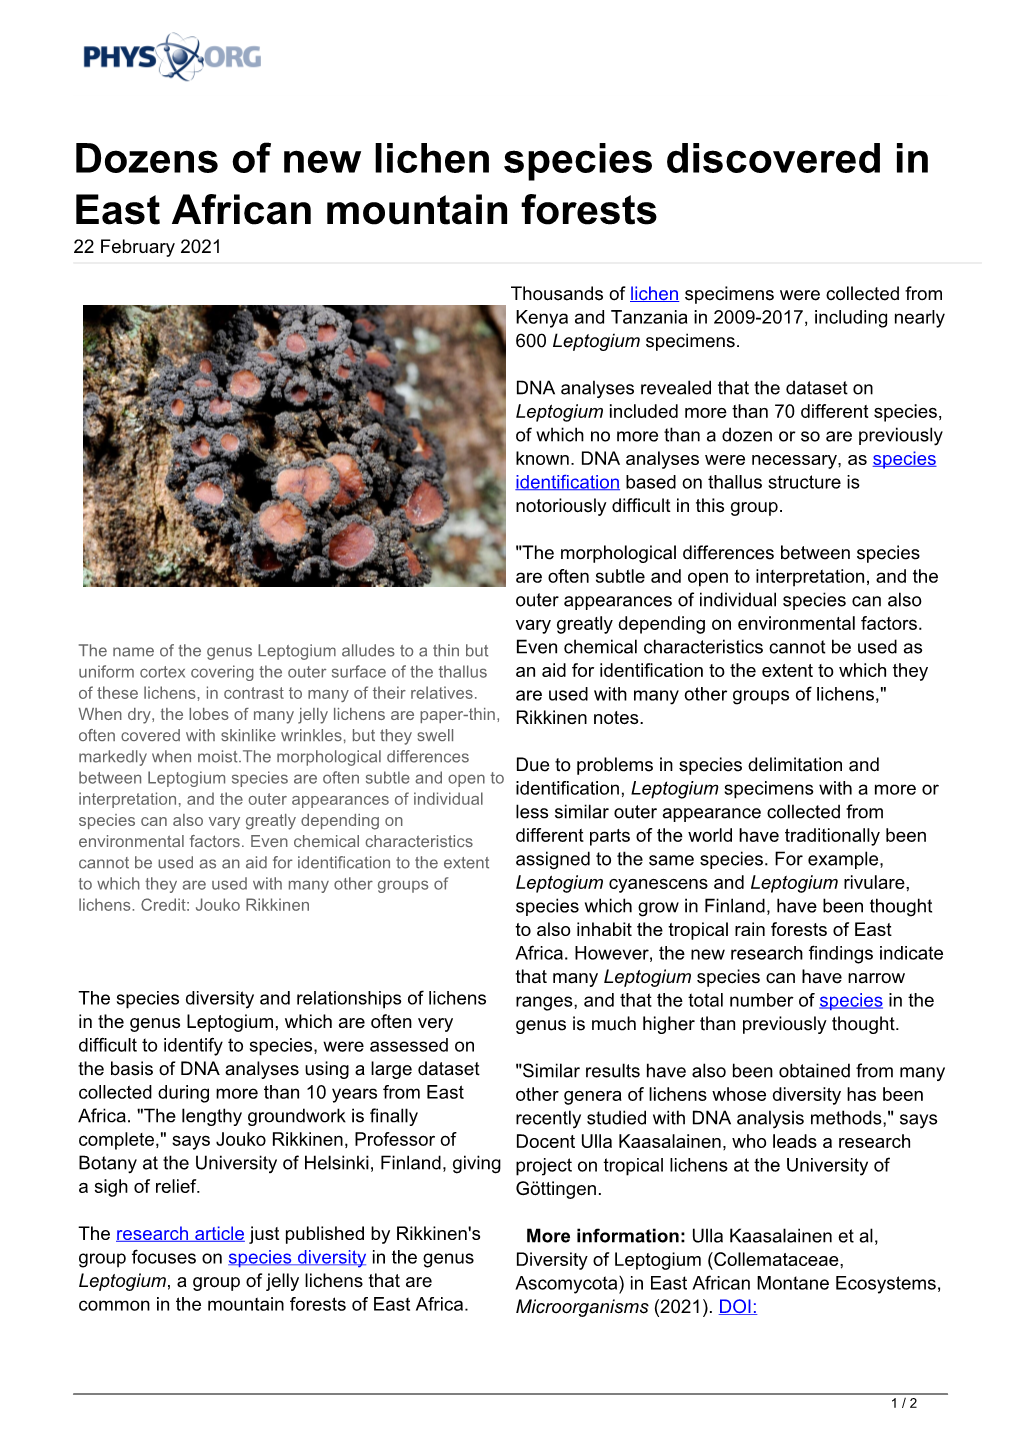 Dozens of New Lichen Species Discovered in East African Mountain Forests 22 February 2021